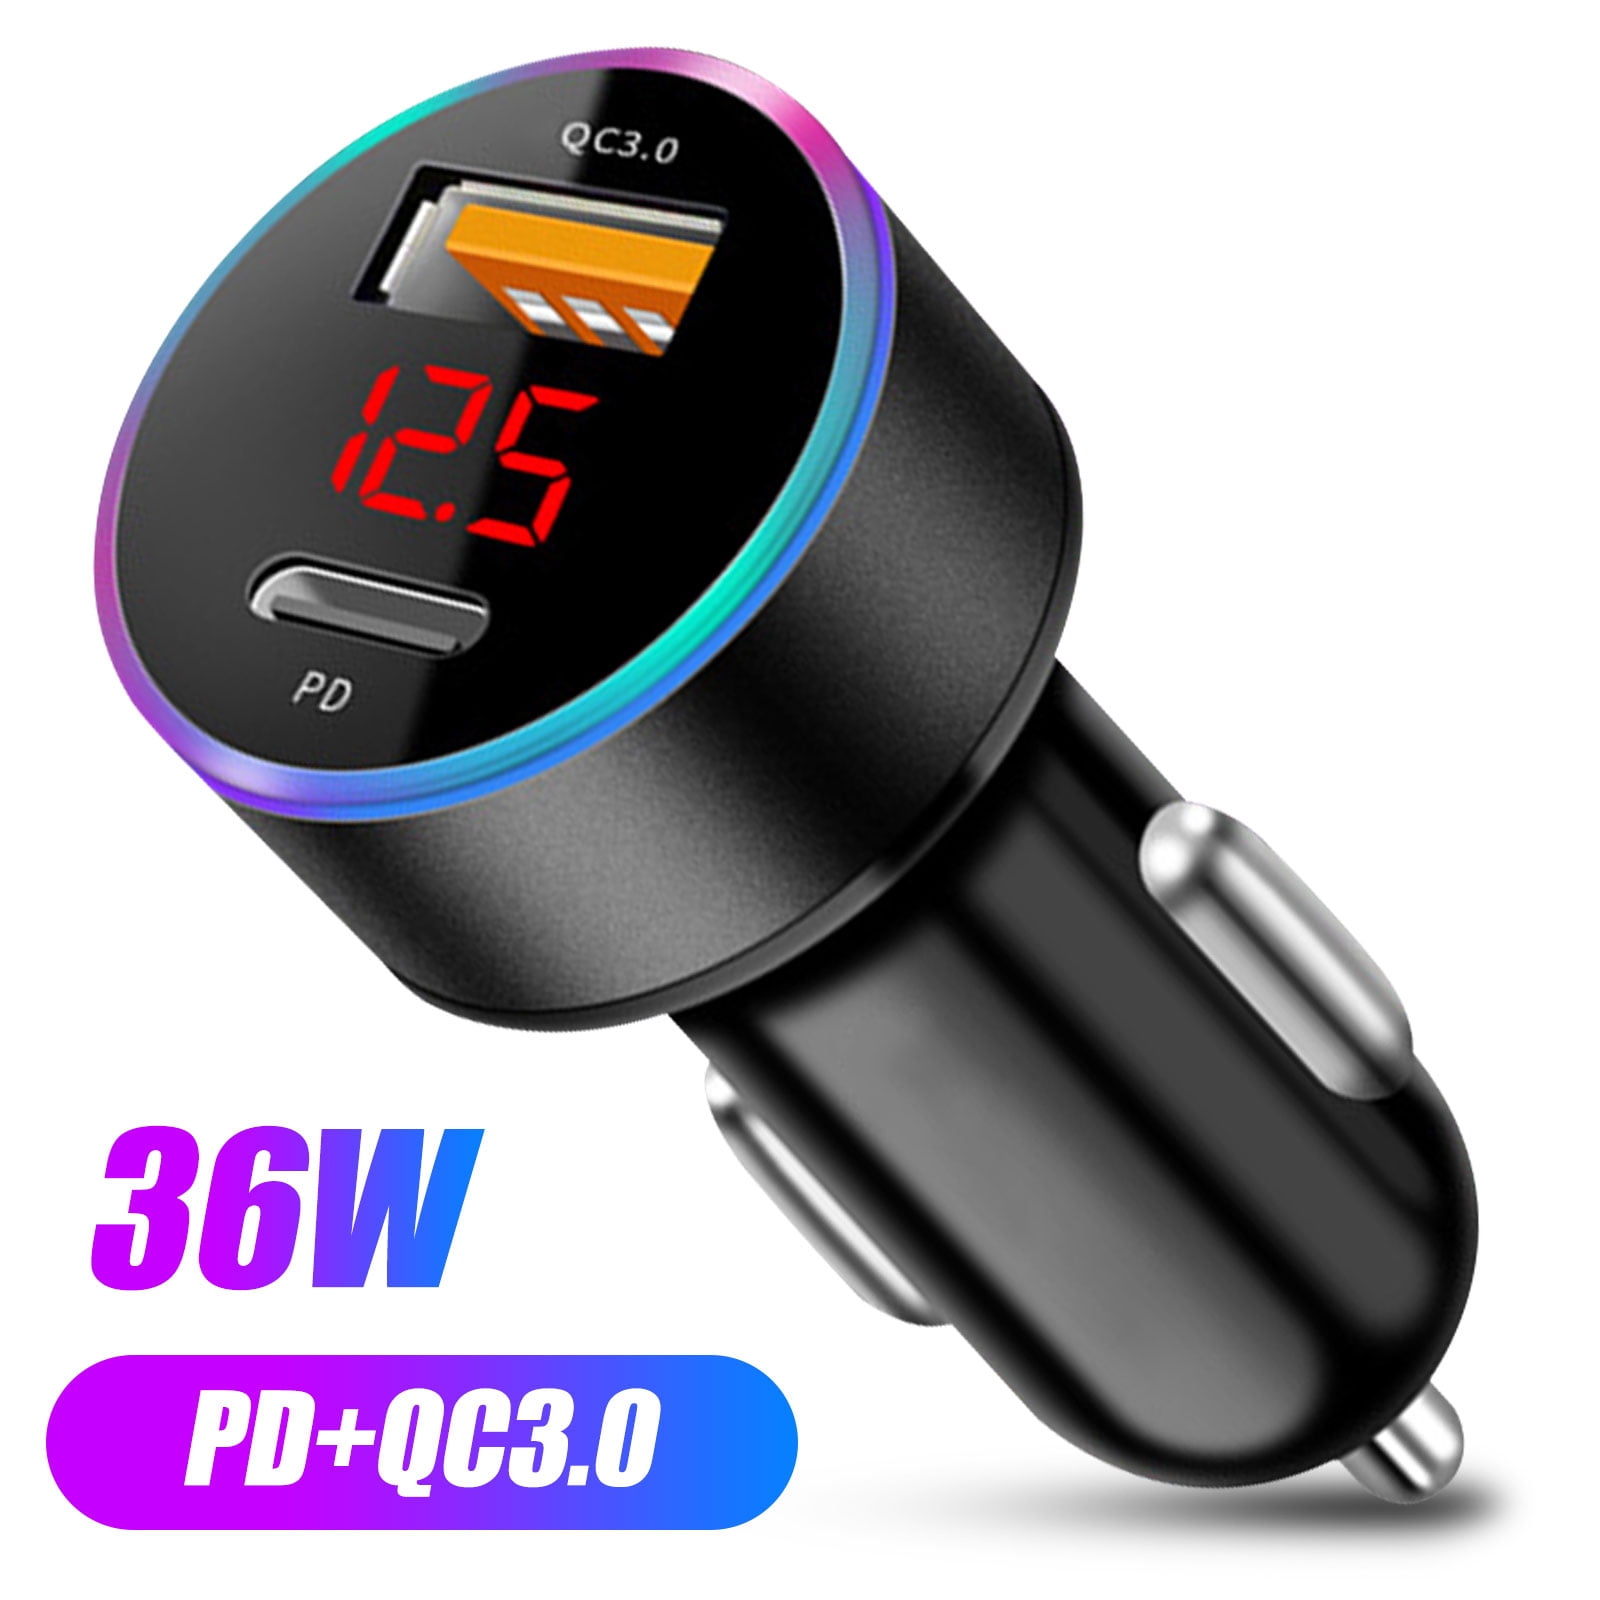 TABLETS 36W 2-PORT USB CAR CHARGER QUICK TYPE-C PORT DC W5L for PHONE USB-C 